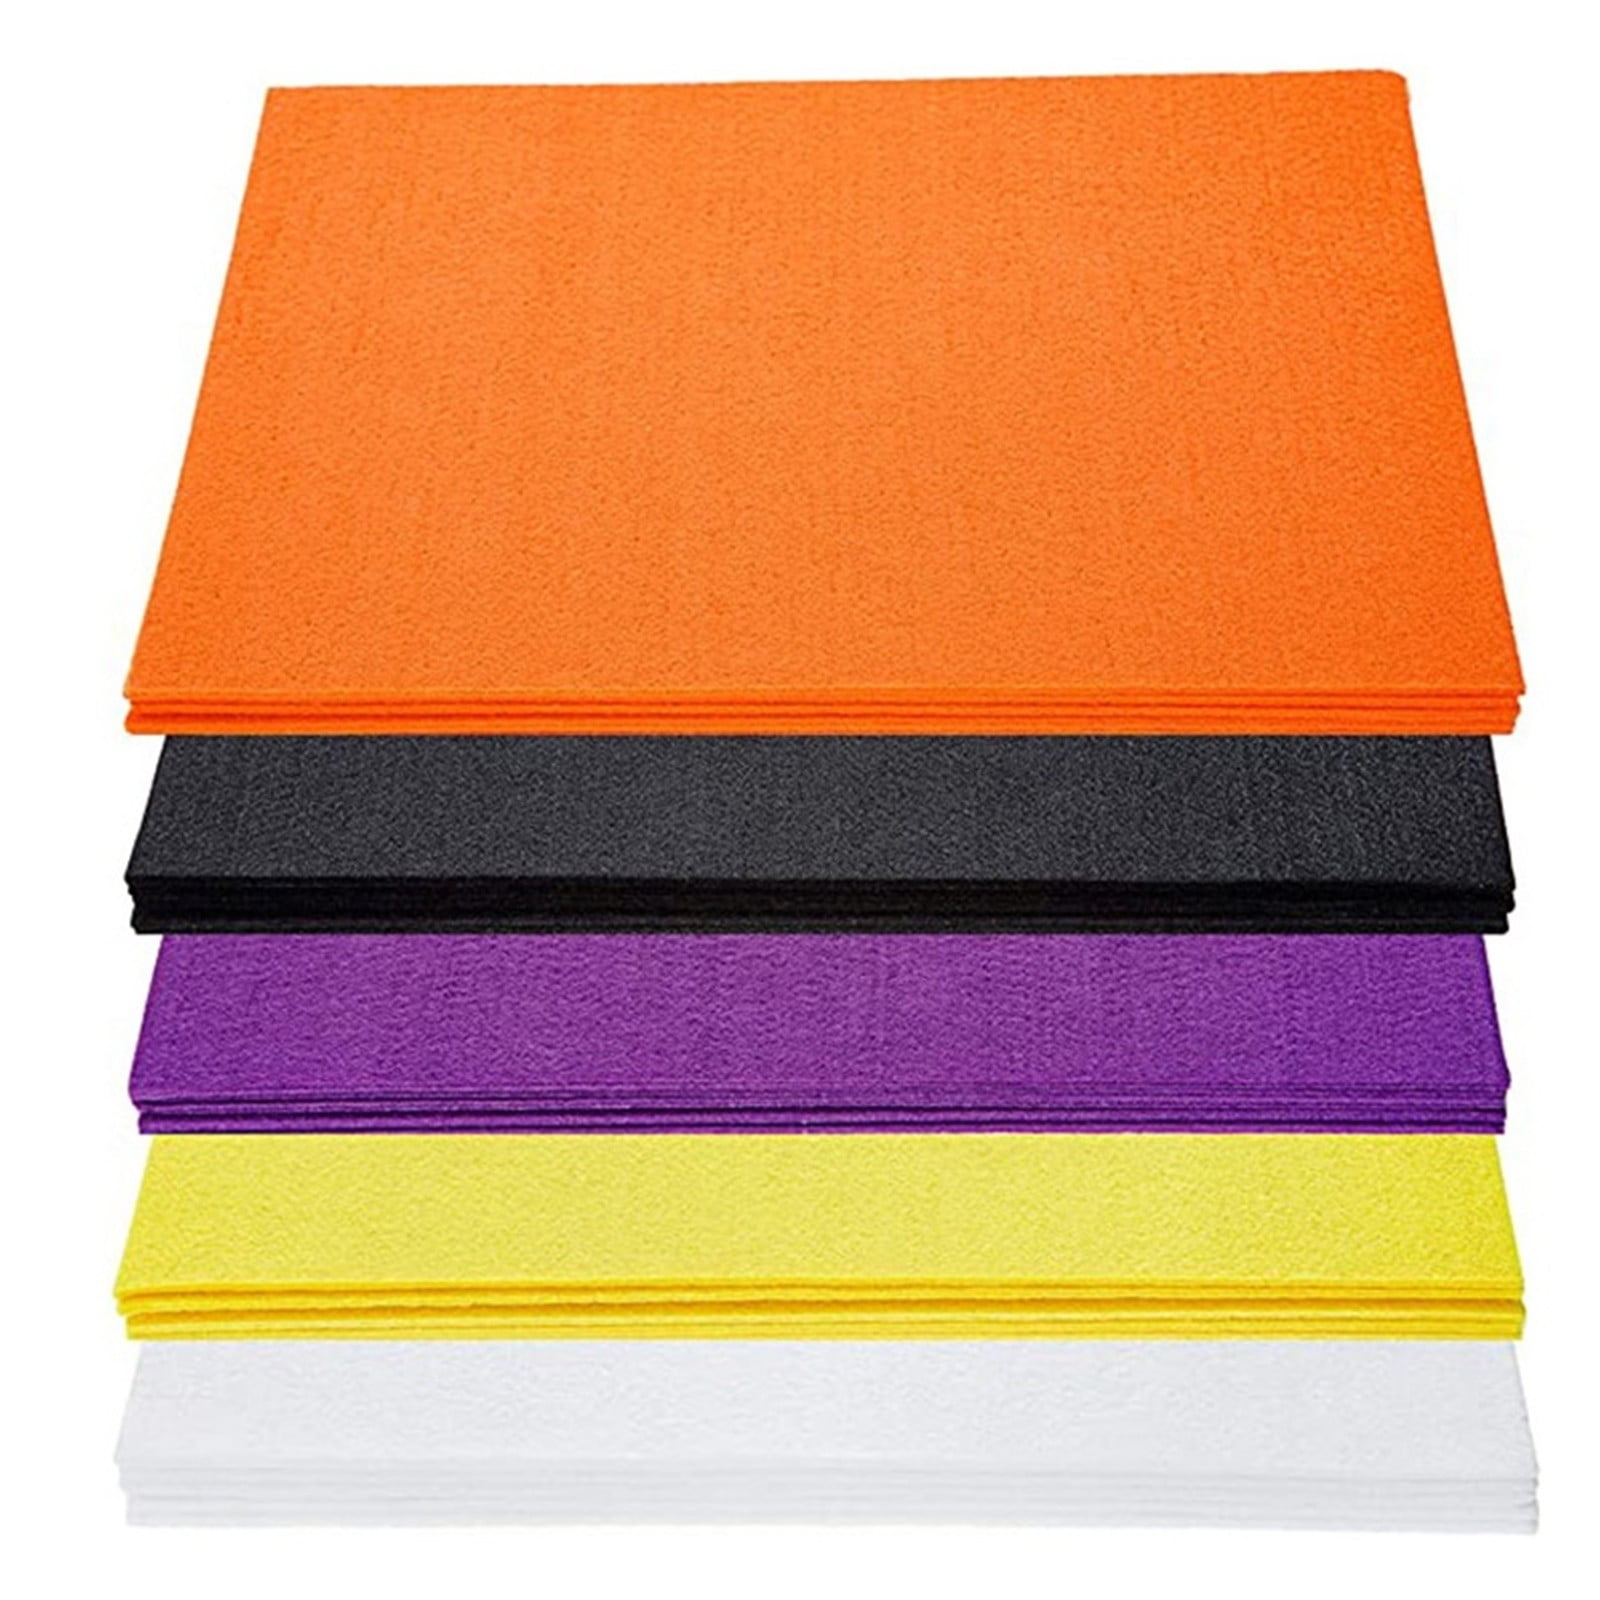 9 x 12 Stiffened Felt Sheets, Assorted Colors 10 Sheets